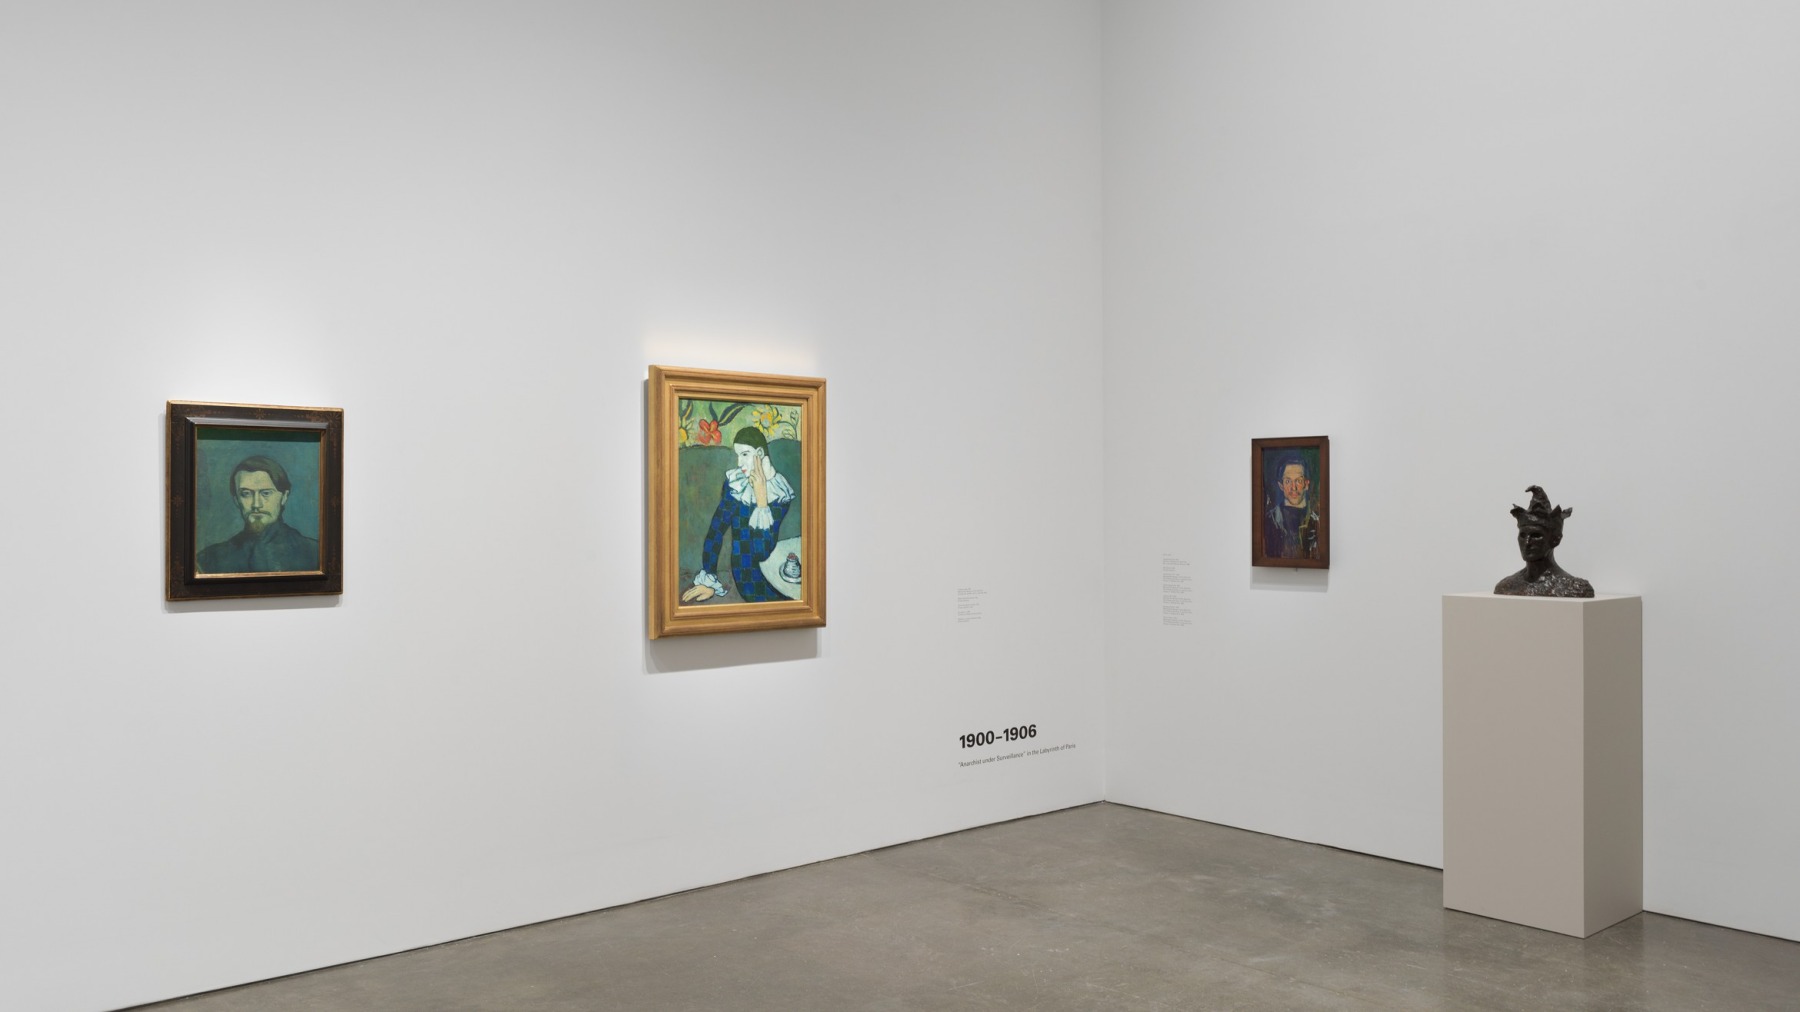 Installation image for A Foreigner Called Picasso, at Gagosian